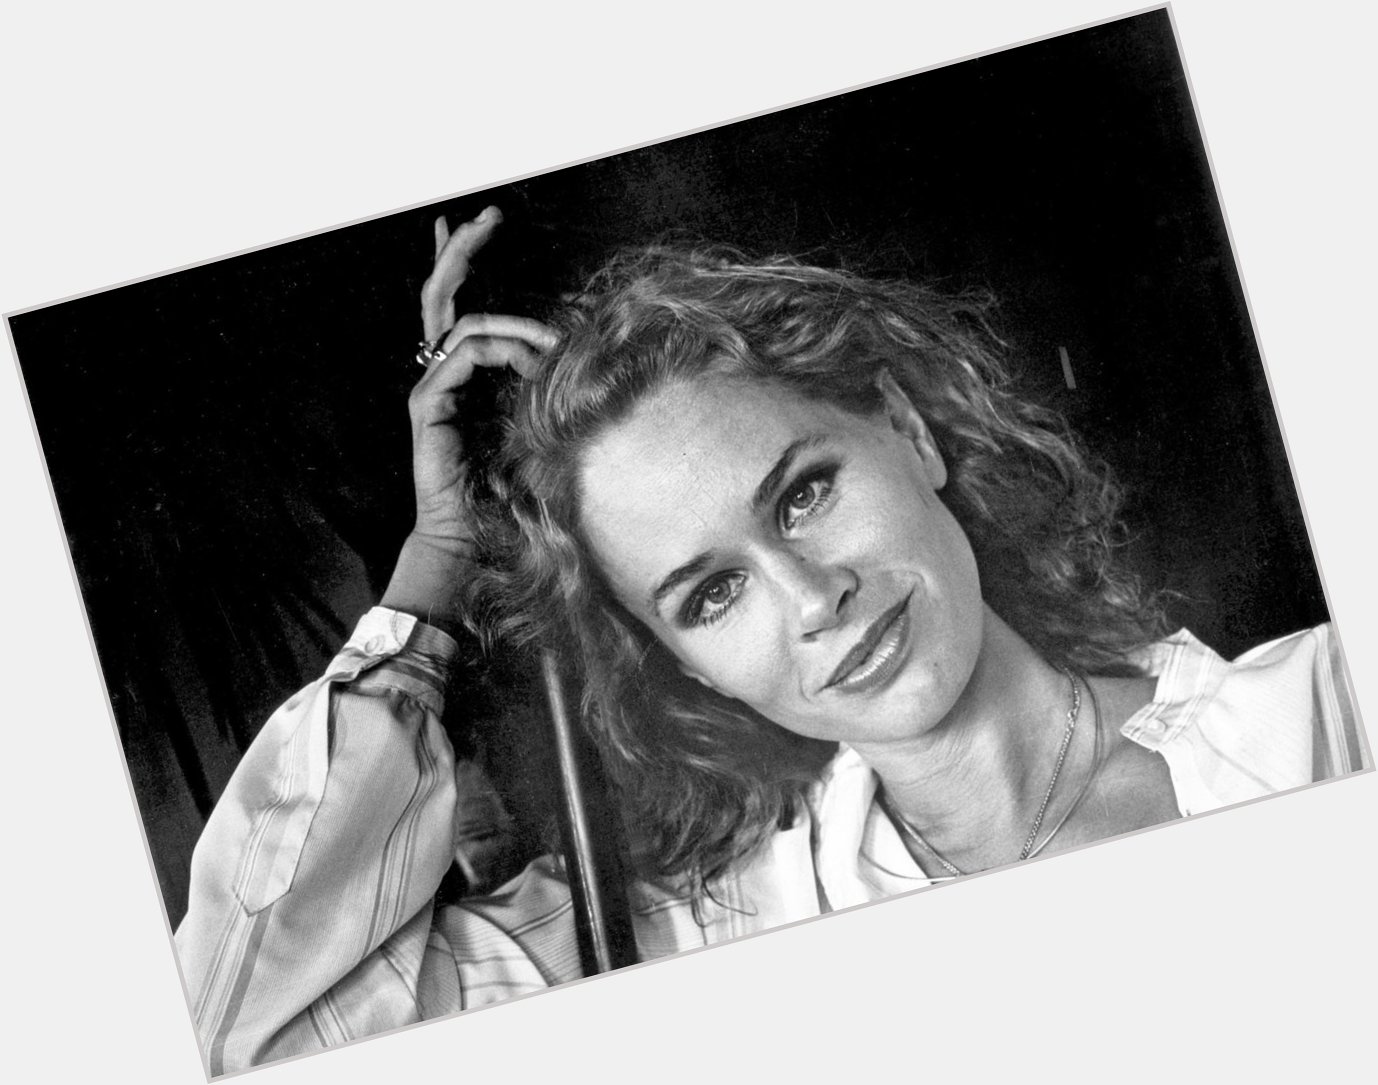 Happy birthday to the First Lady of \70s horror: KAREN BLACK! What\s your favorite film she starred in? 